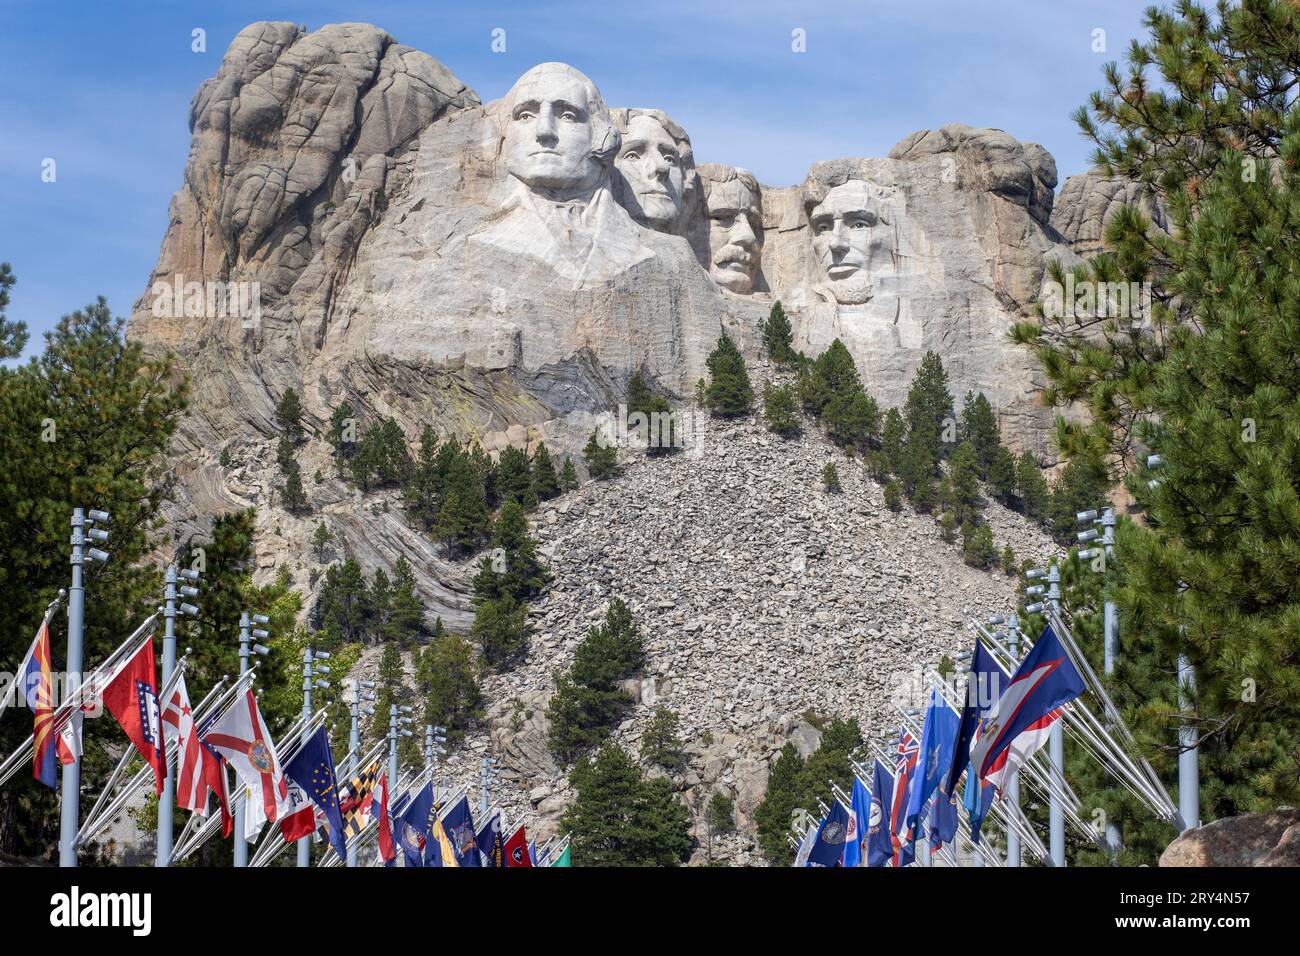 Mount Rushmore National Memorial is a colossal sculpture carved into the granite face of Mount Rushmore. George Washington, Thomas Jefferson, Theodore Stock Photo